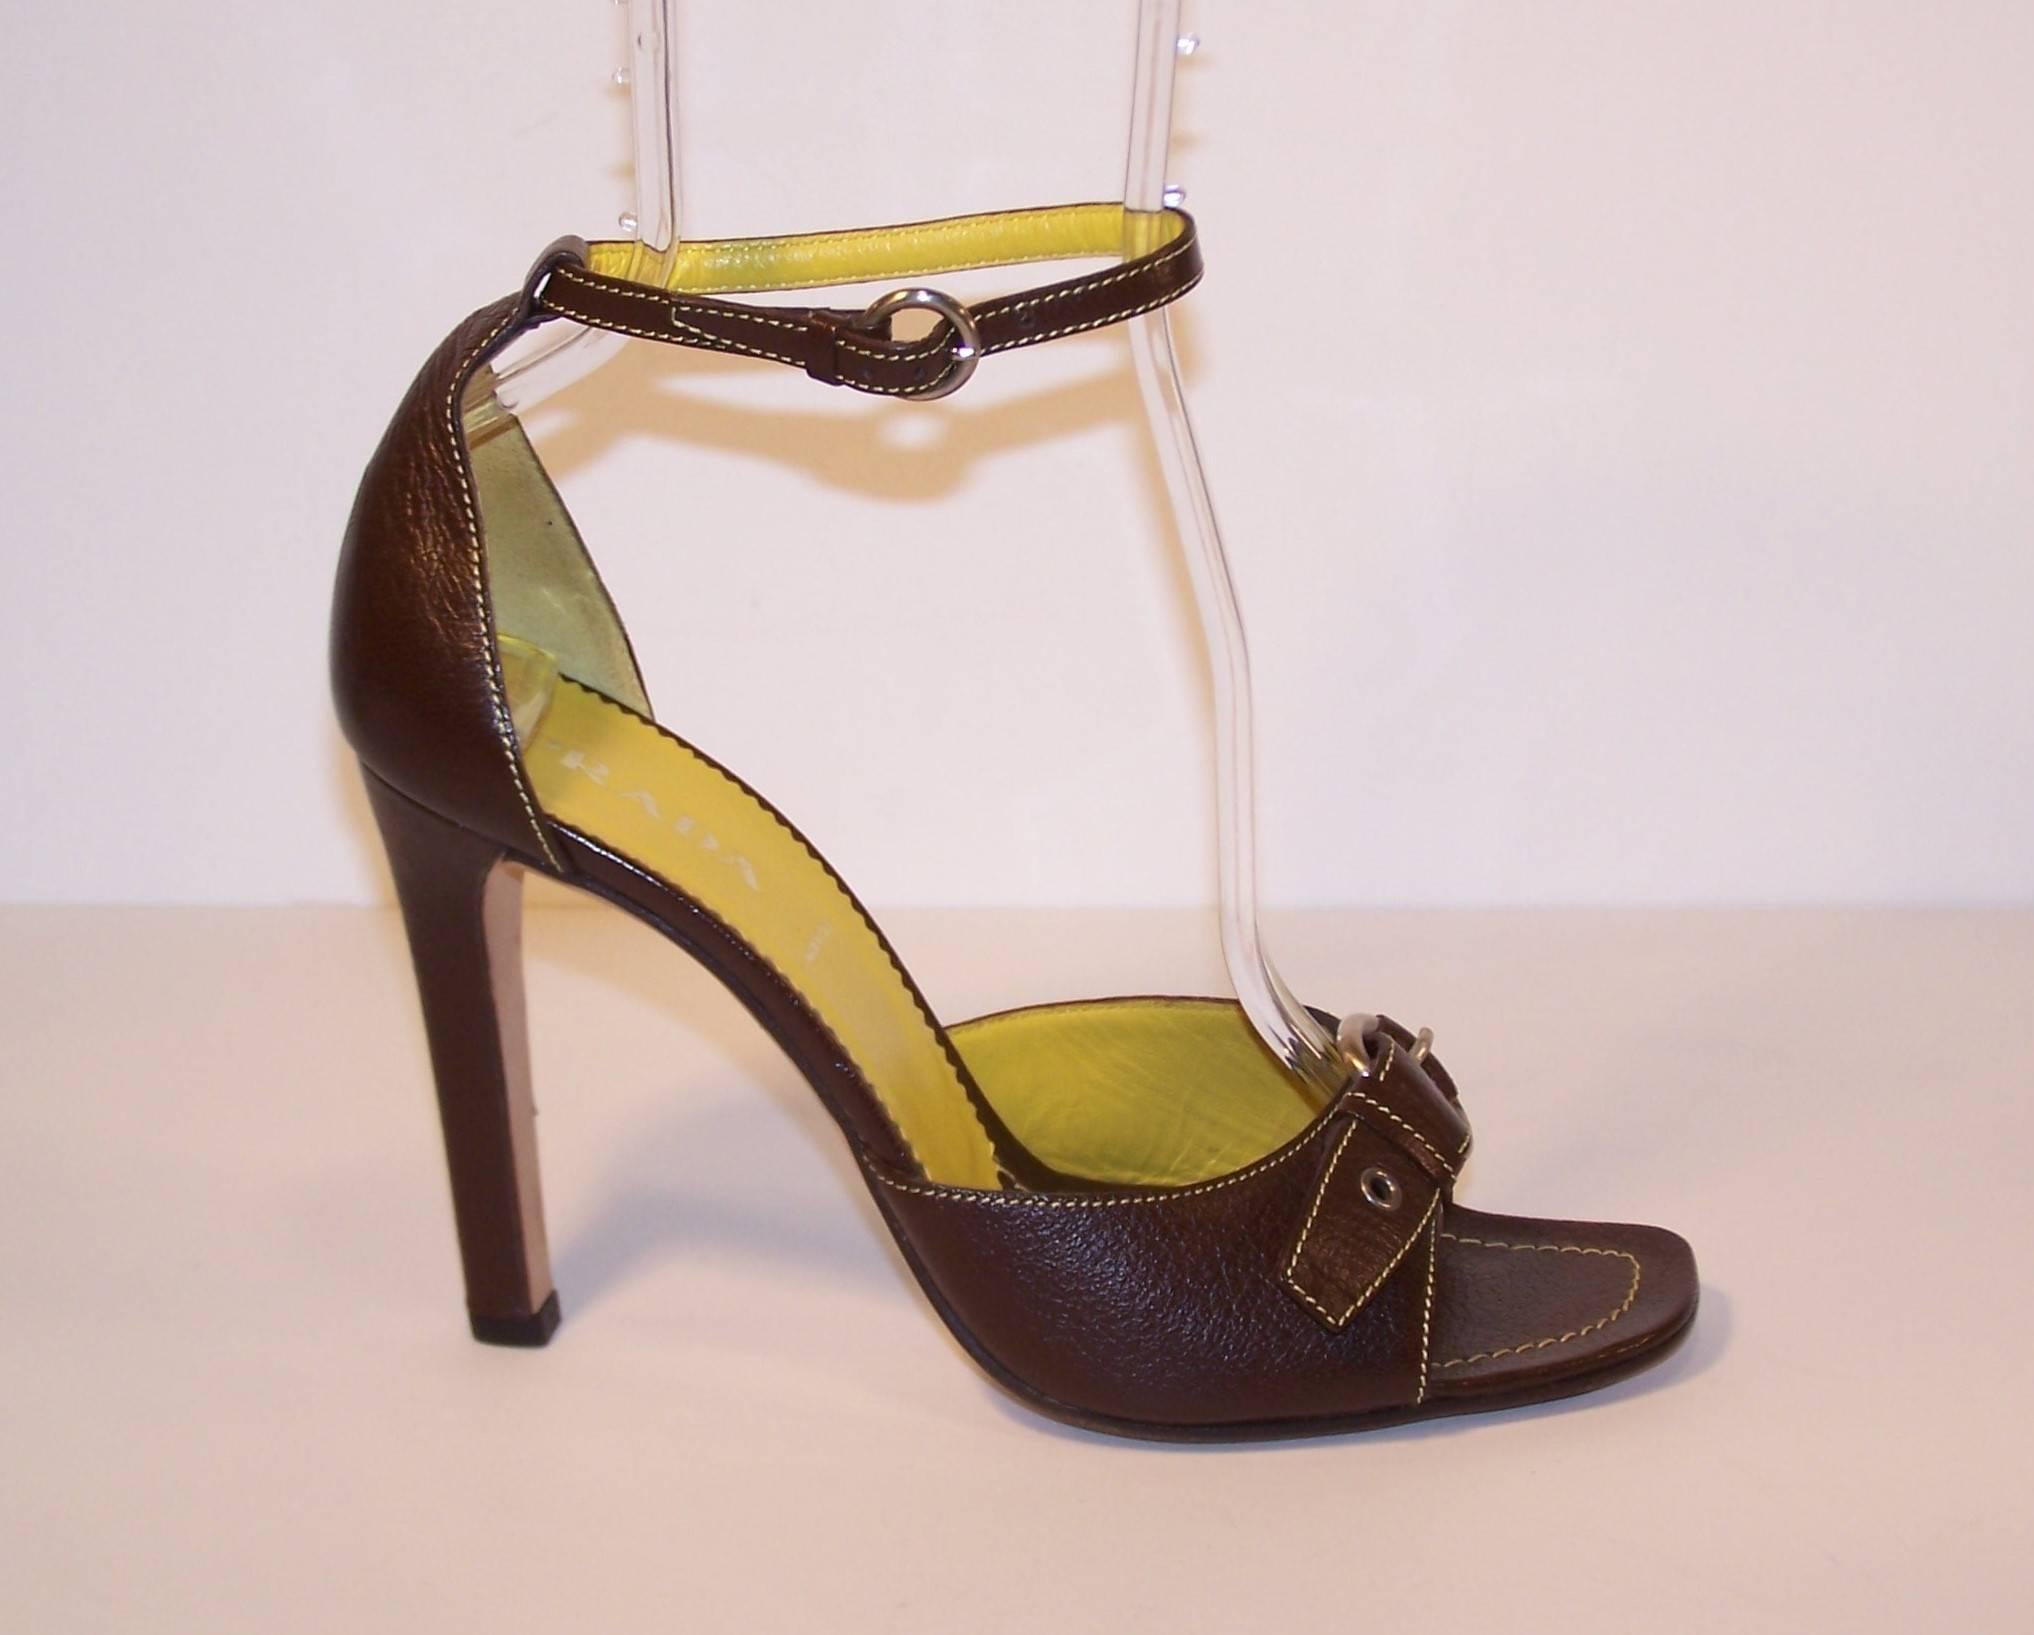 Prada Brown Leather Sandals With Ankle Straps & Buckles Sz 38 1